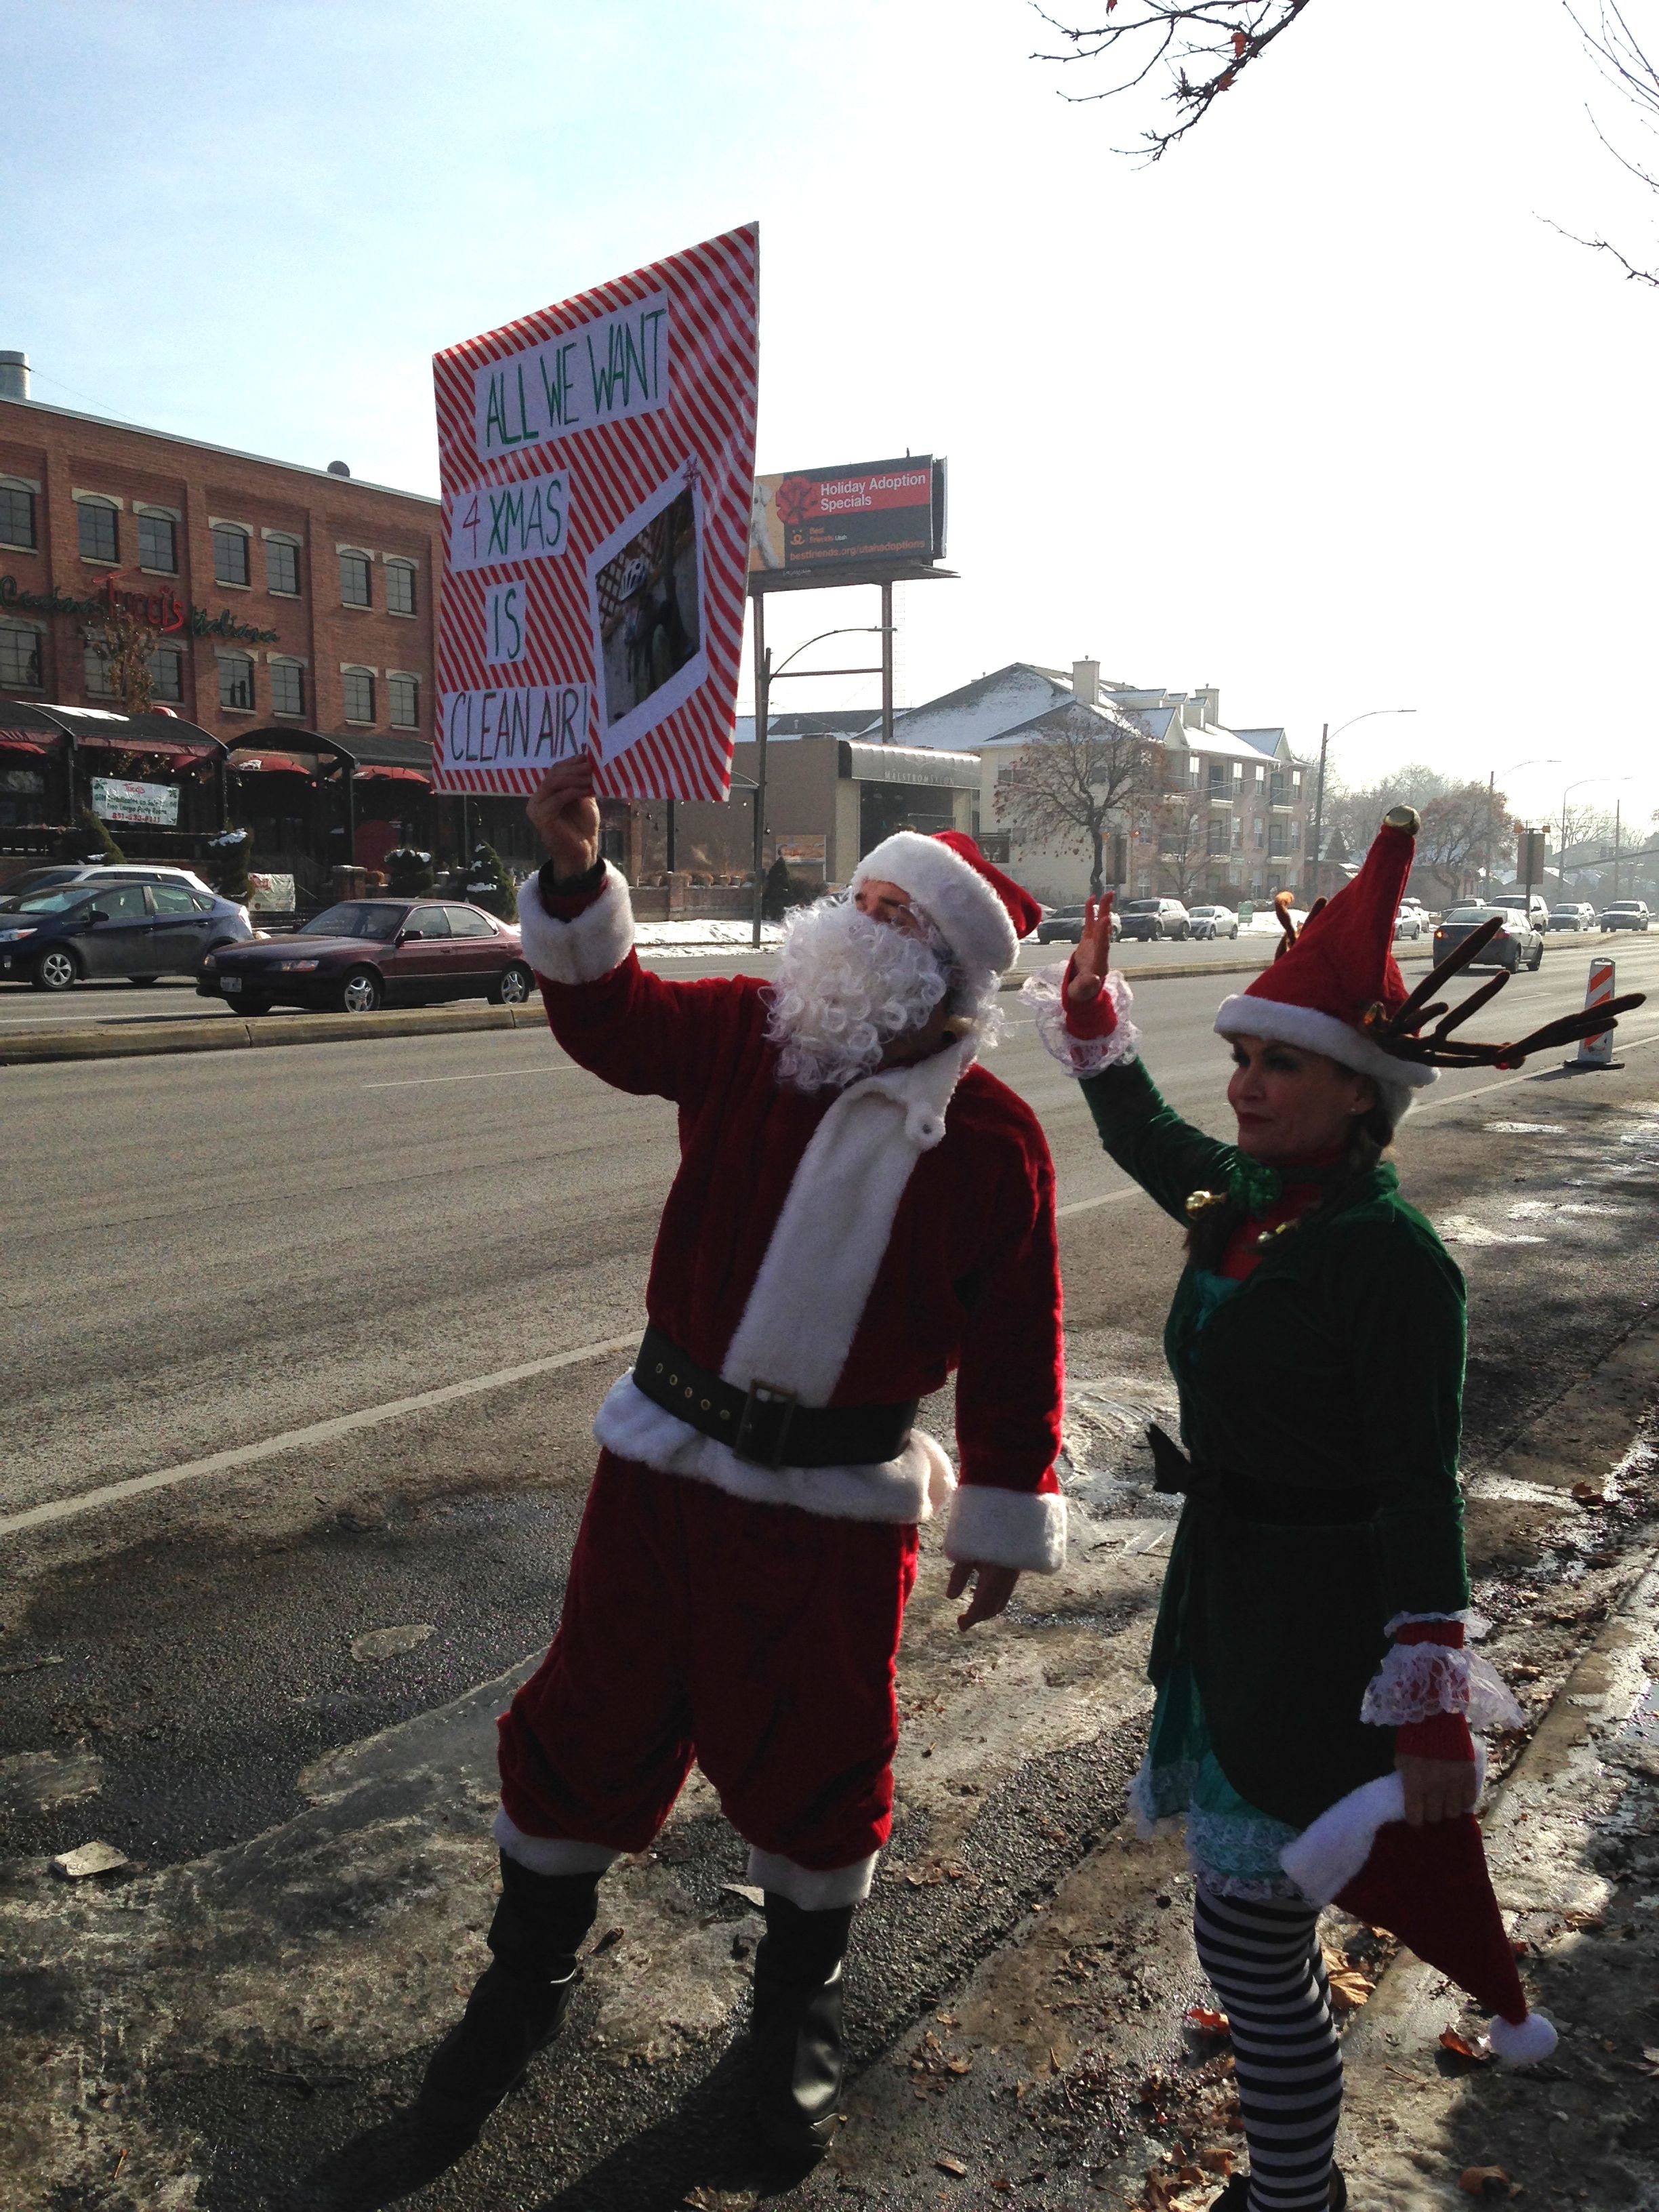 Clean air protesters dressed as Santa and an elf wave to passing cars outside Trolley Square.